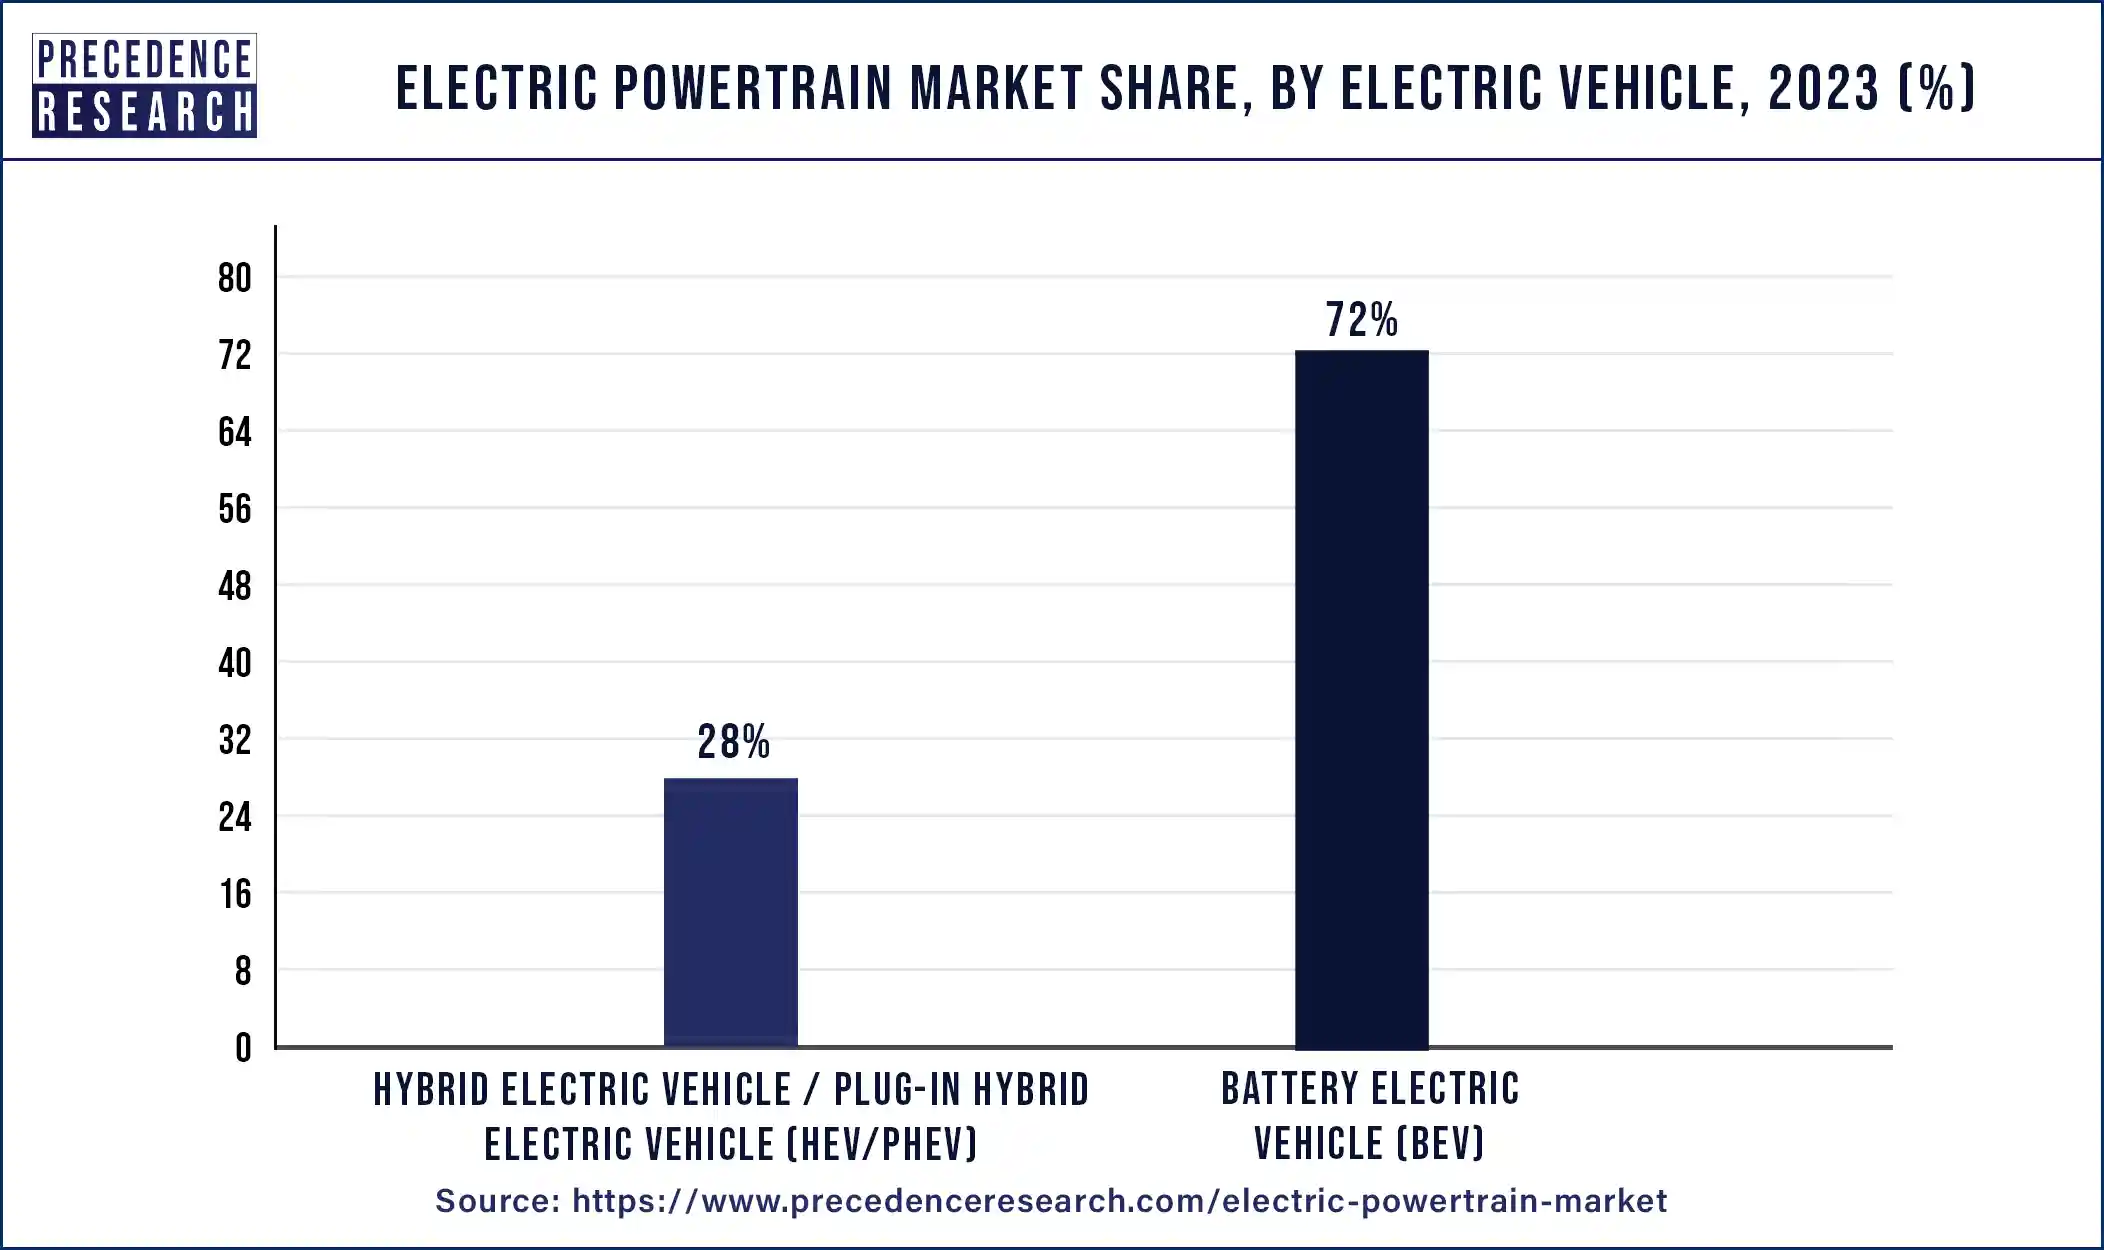 Electric Powertrain Market Share, By Electric Vehicle, 2023 (%)